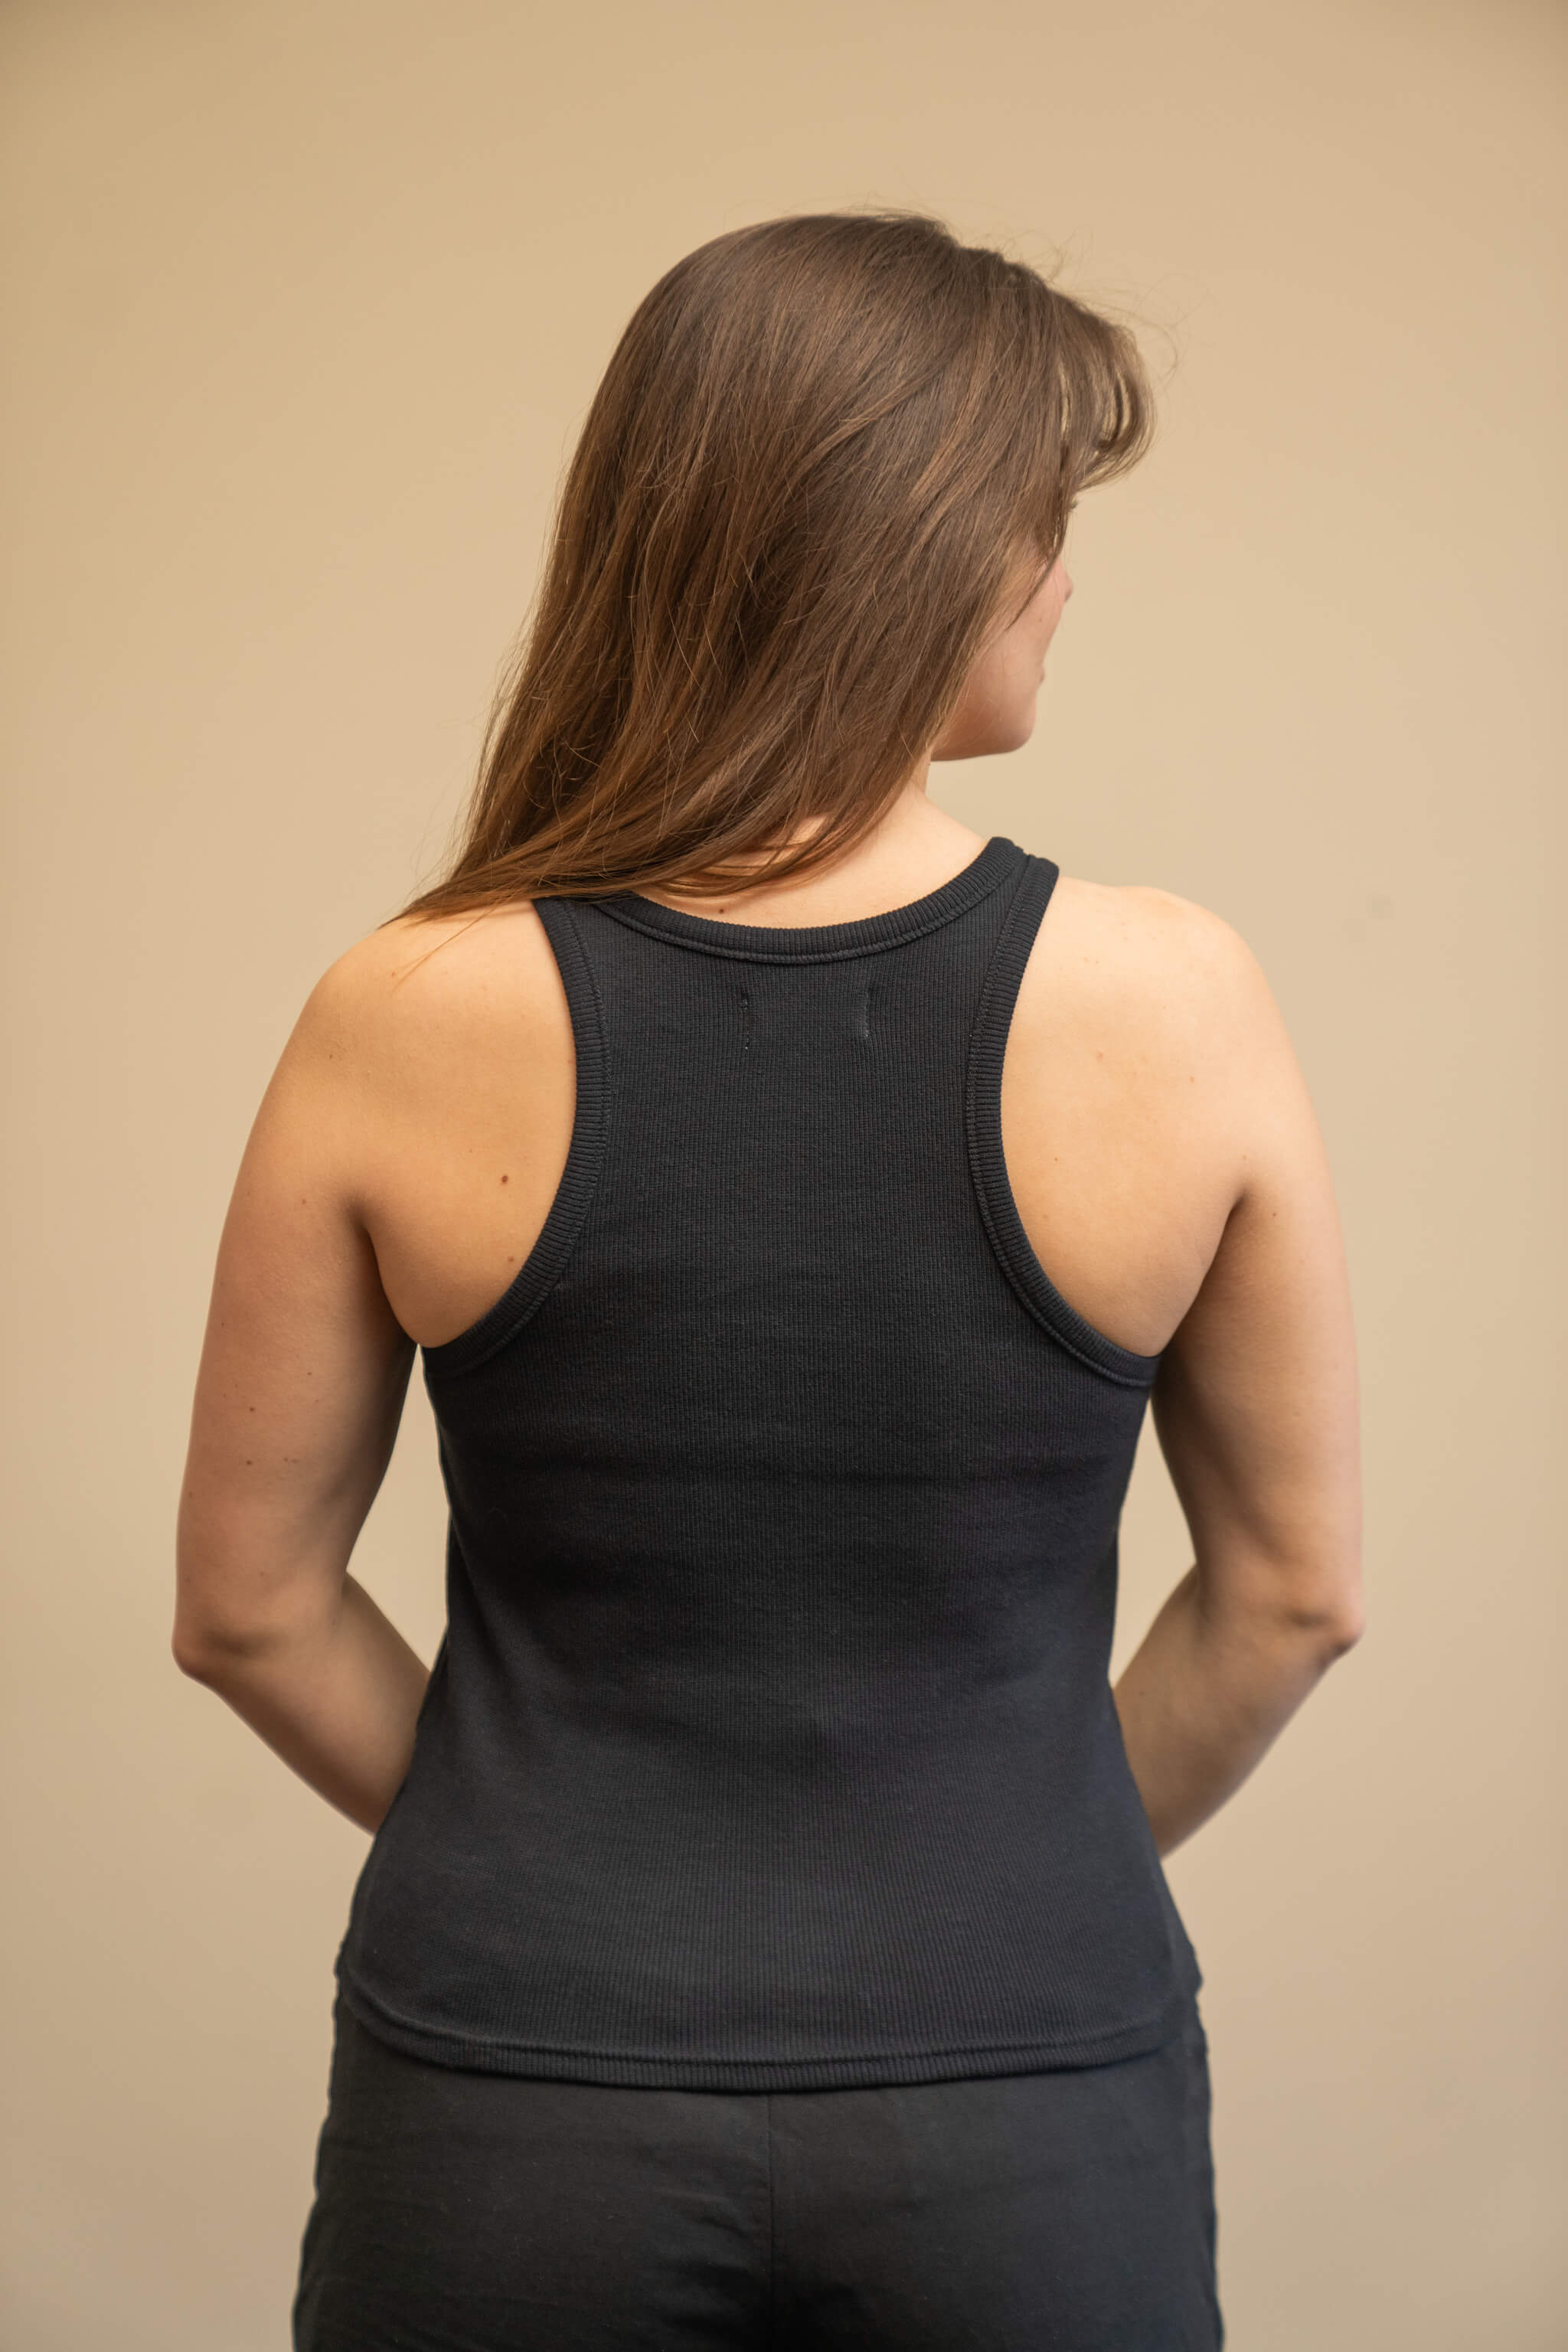 Rear view of a woman wearing a black tank top from Cyme Copenhagen's spring/summer collection. The tank top features a simple and sleek design with racerback styling. The model stands against a neutral background, highlighting the clean lines and minimalist appeal of the garment.